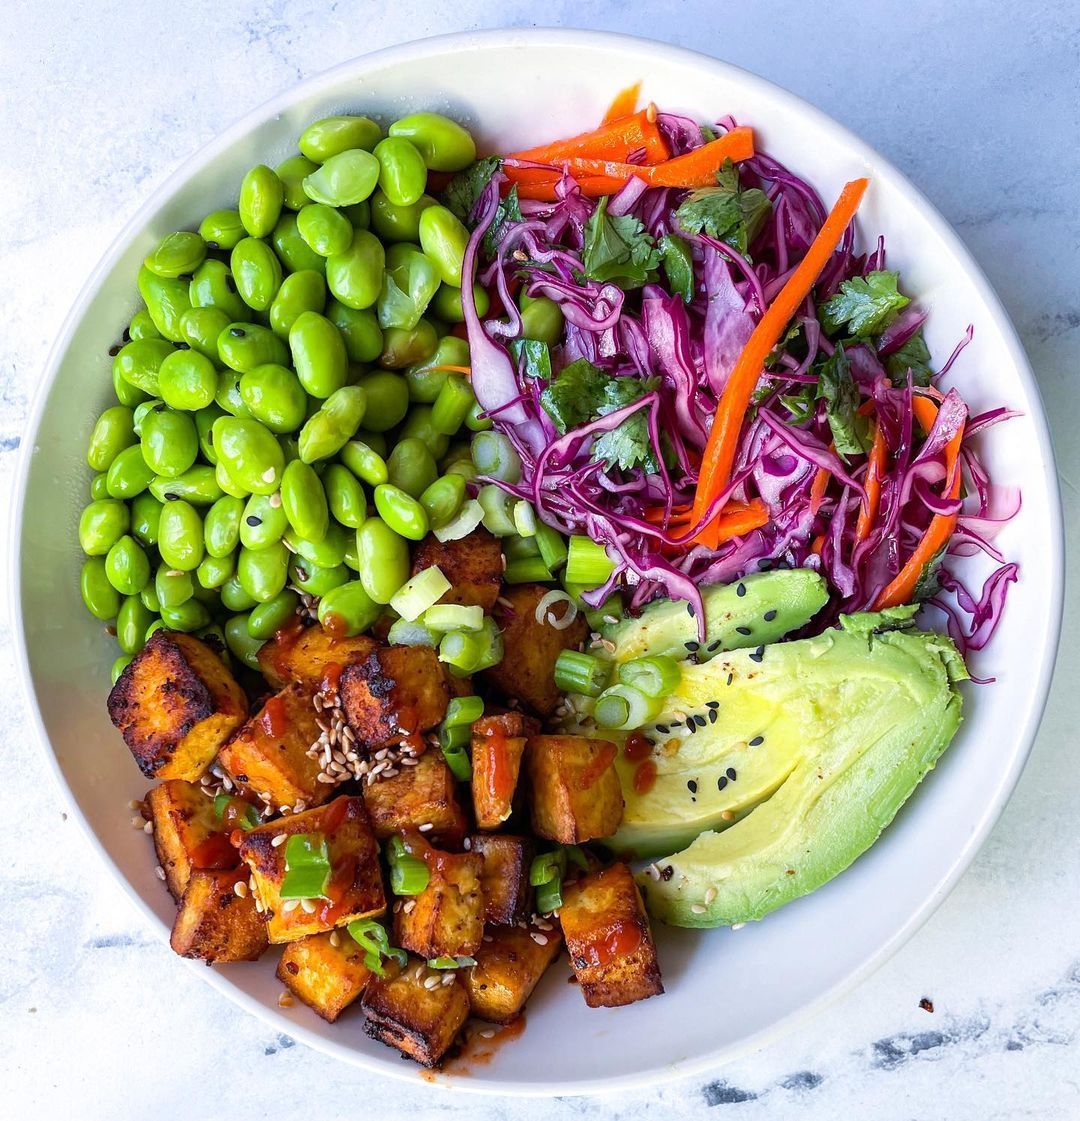 What is the importance of having tofu regularly?